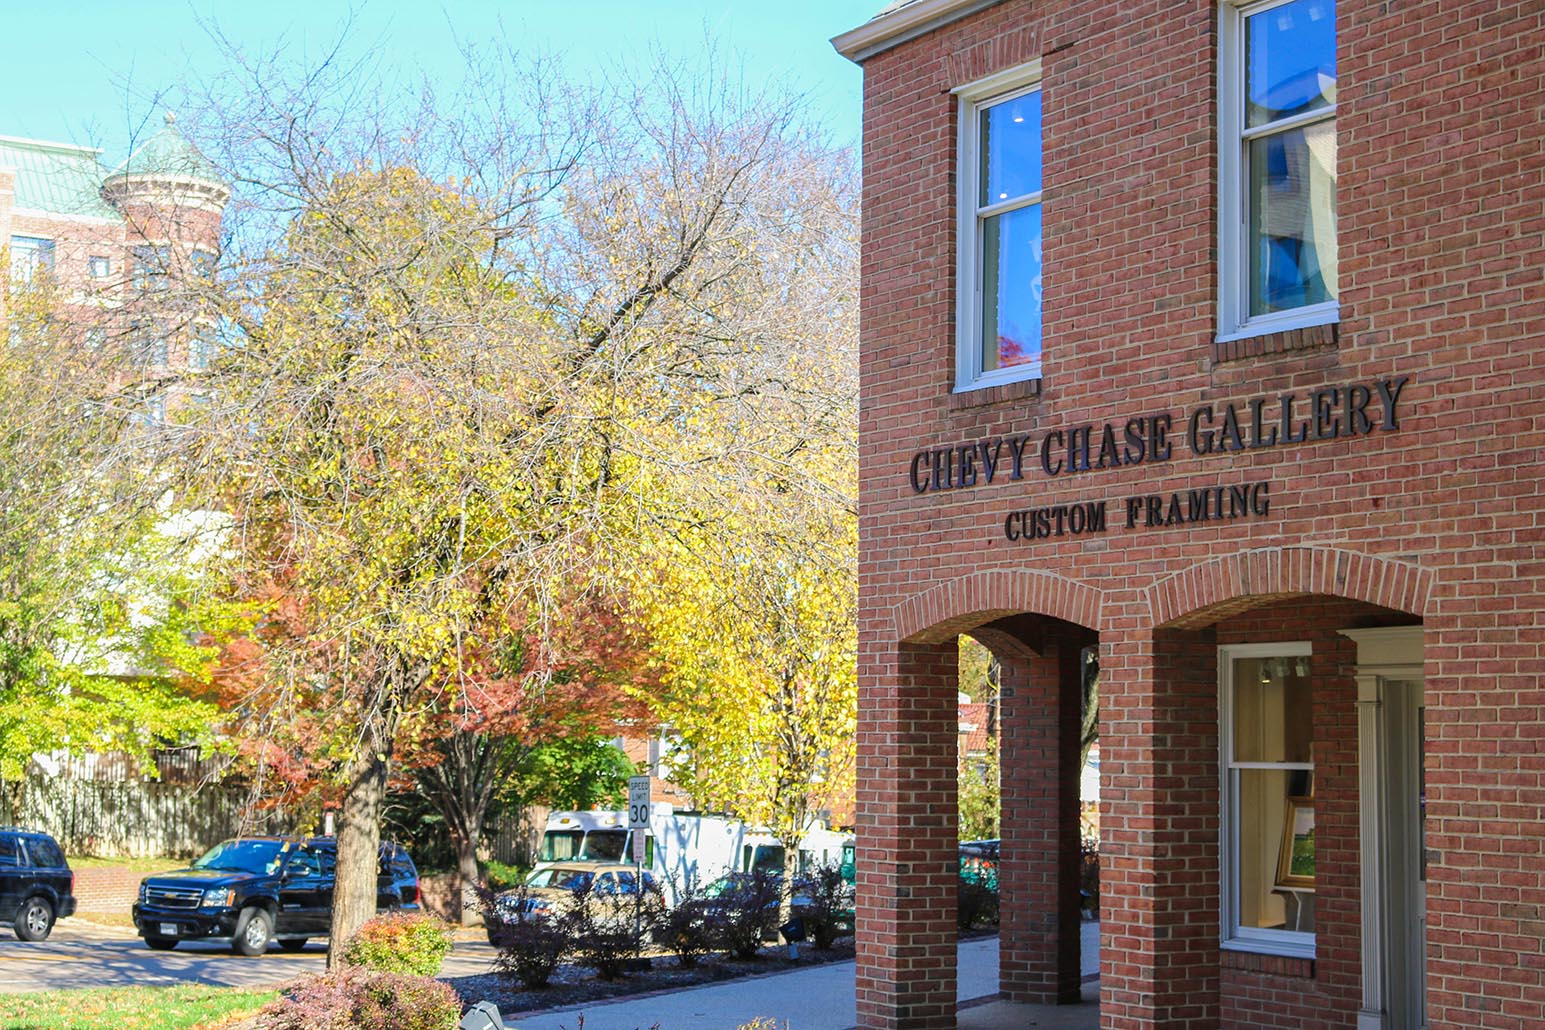 Chevy Chase Gallery in Chevy Chase, Washington, DC